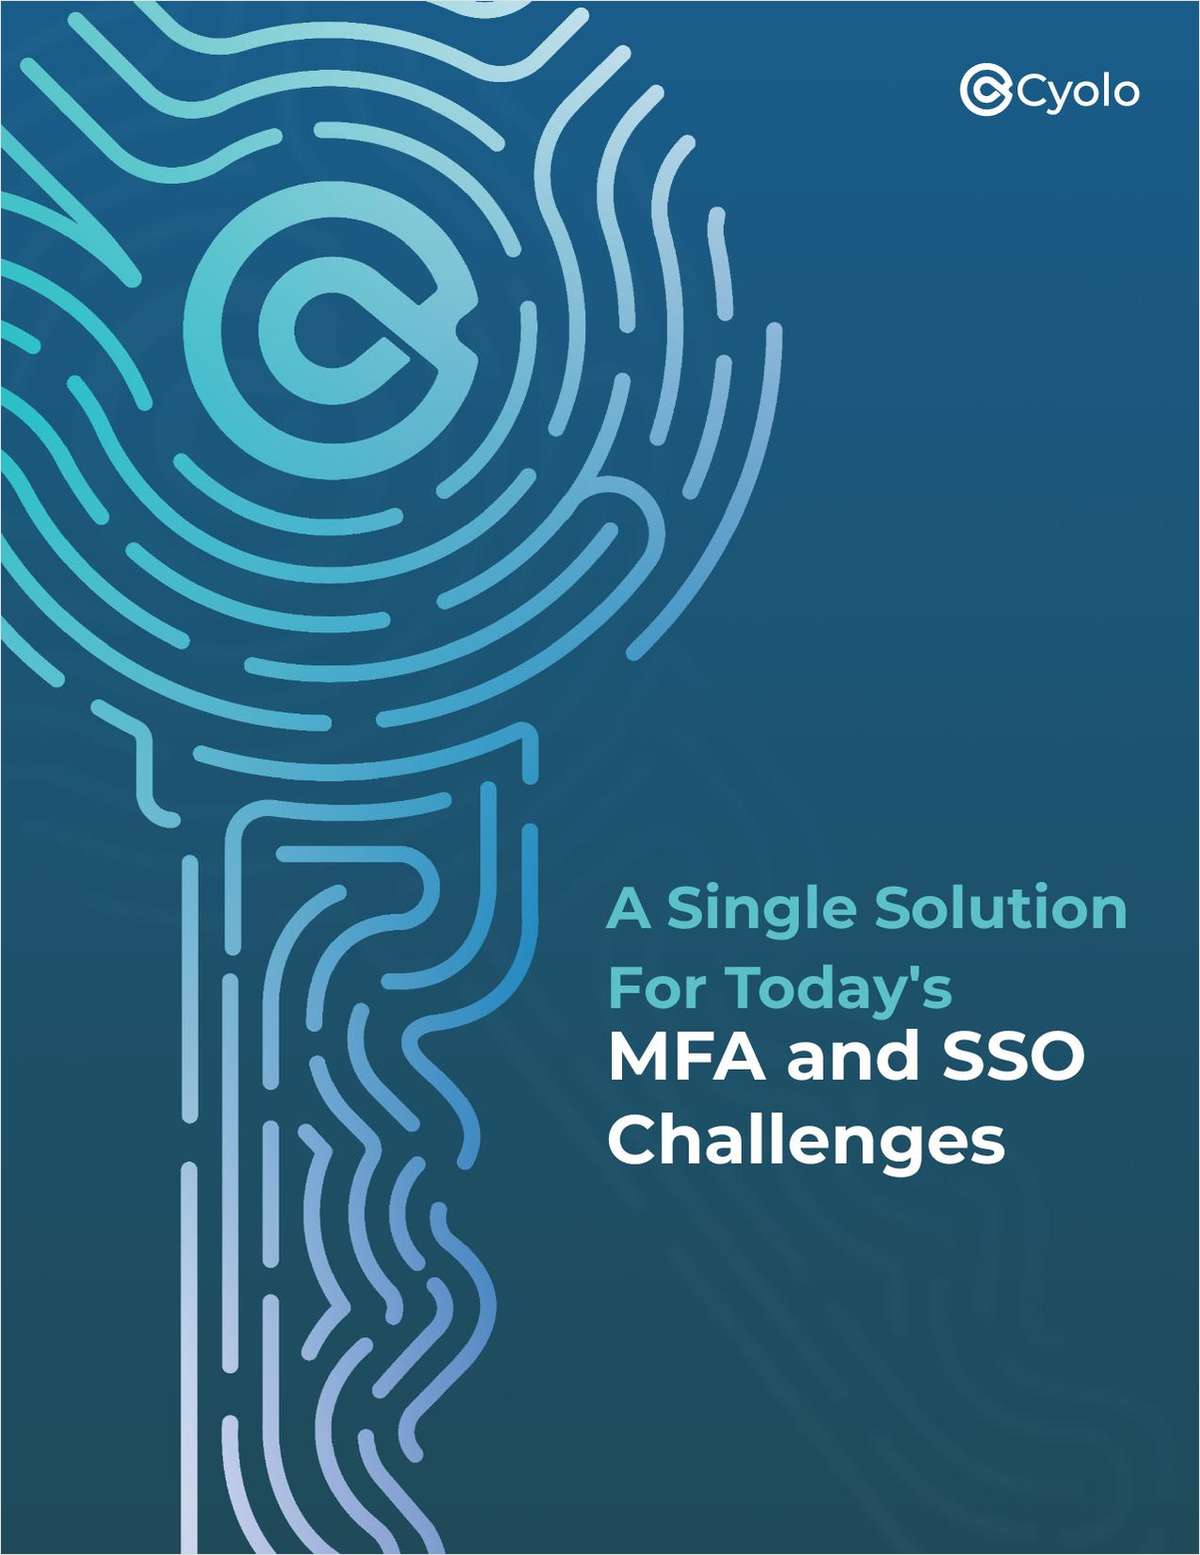 A Single Solution For Today's MFA and SSO Challenges